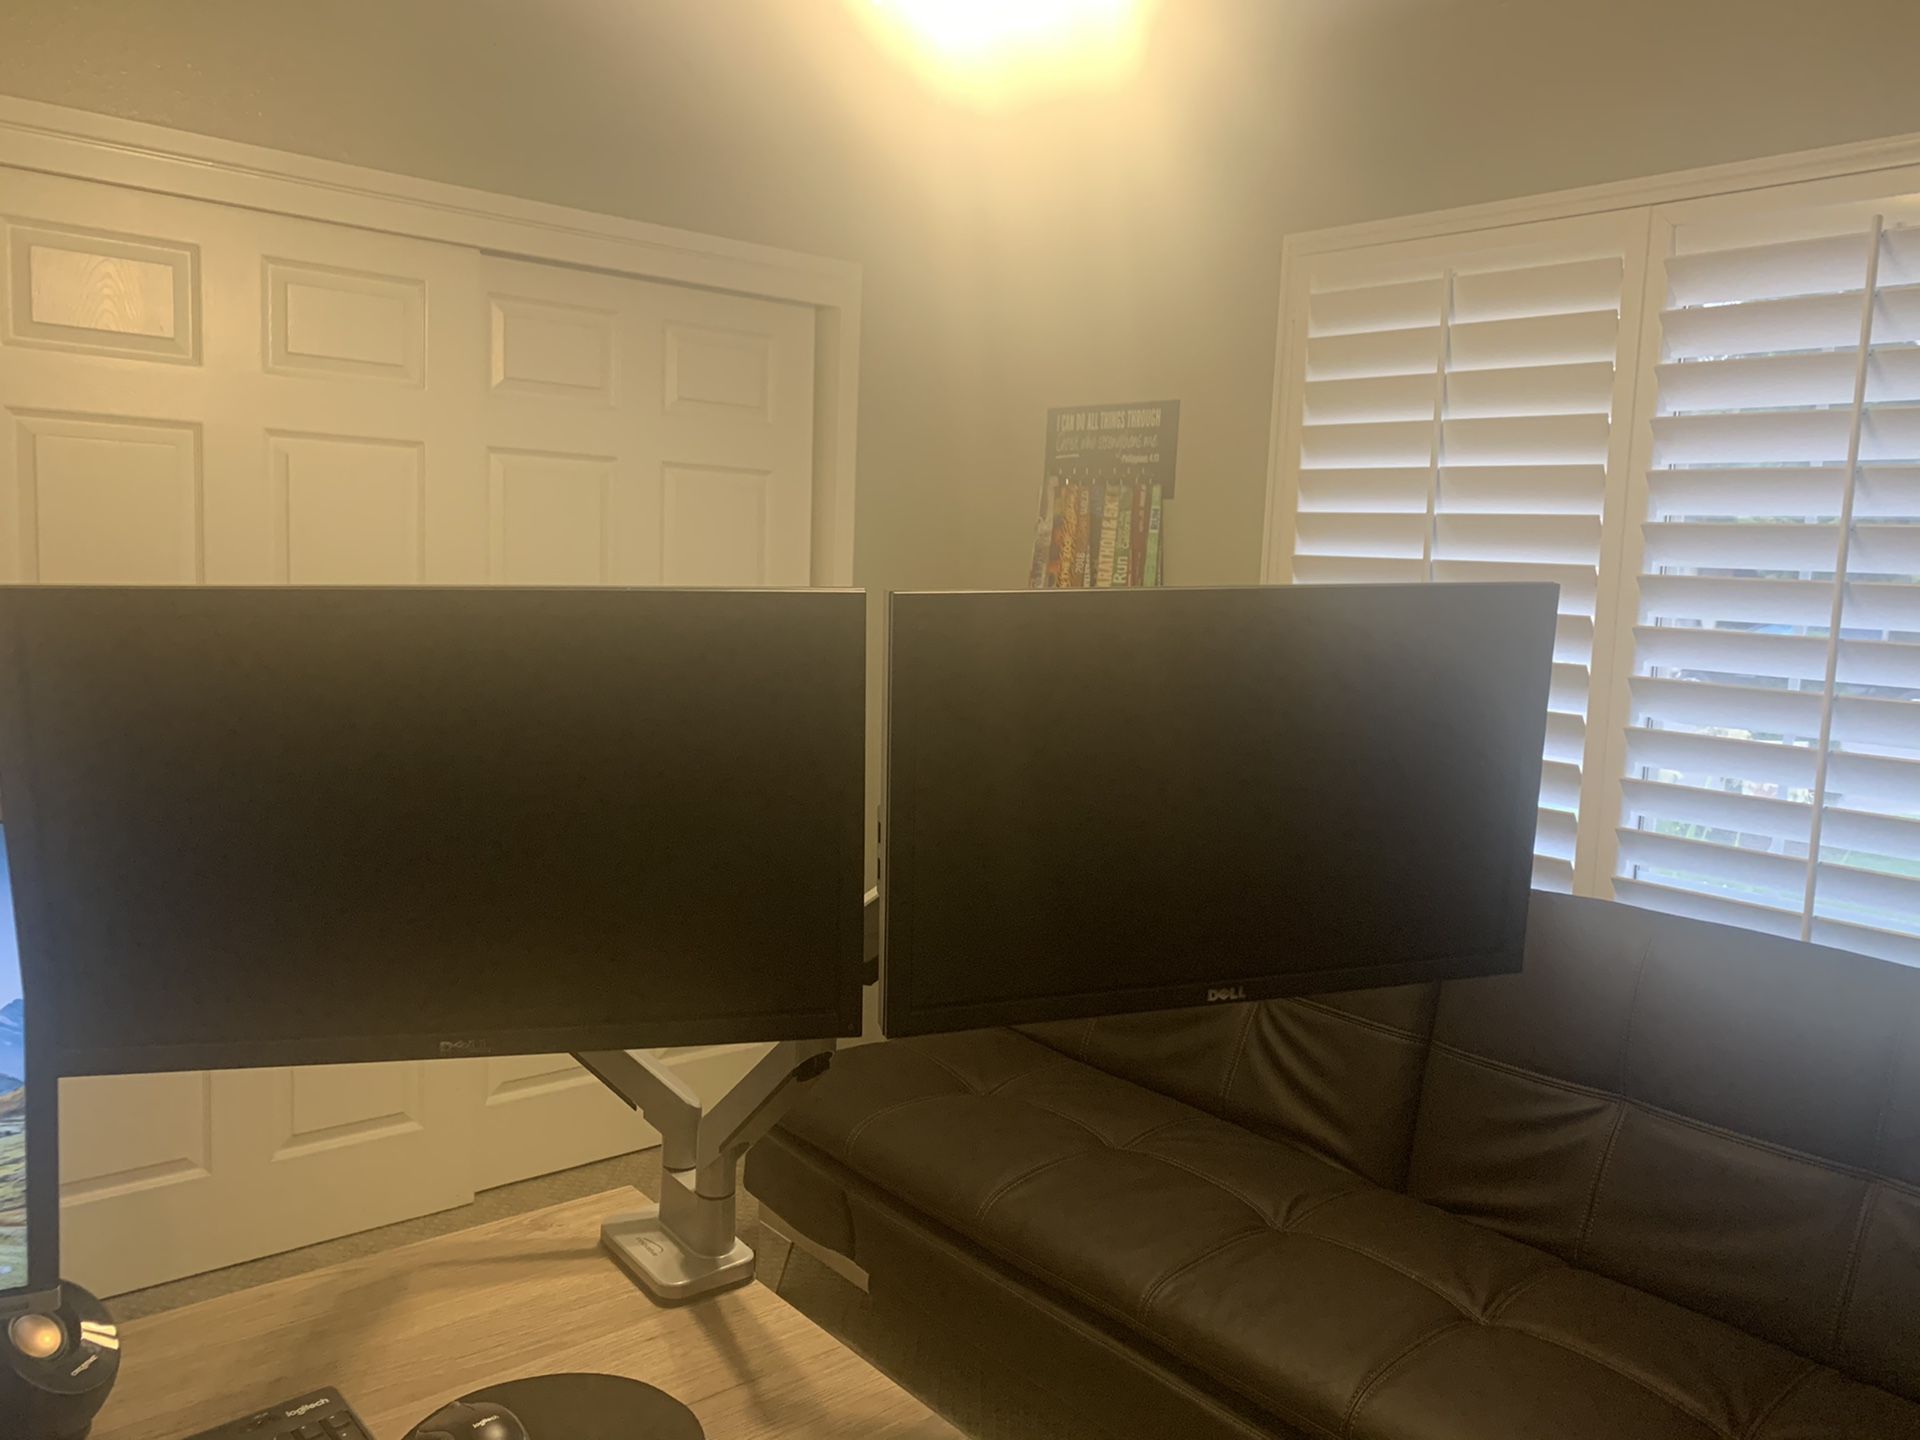 Dual 22” Dell monitors with brand new adjustable monitor arms